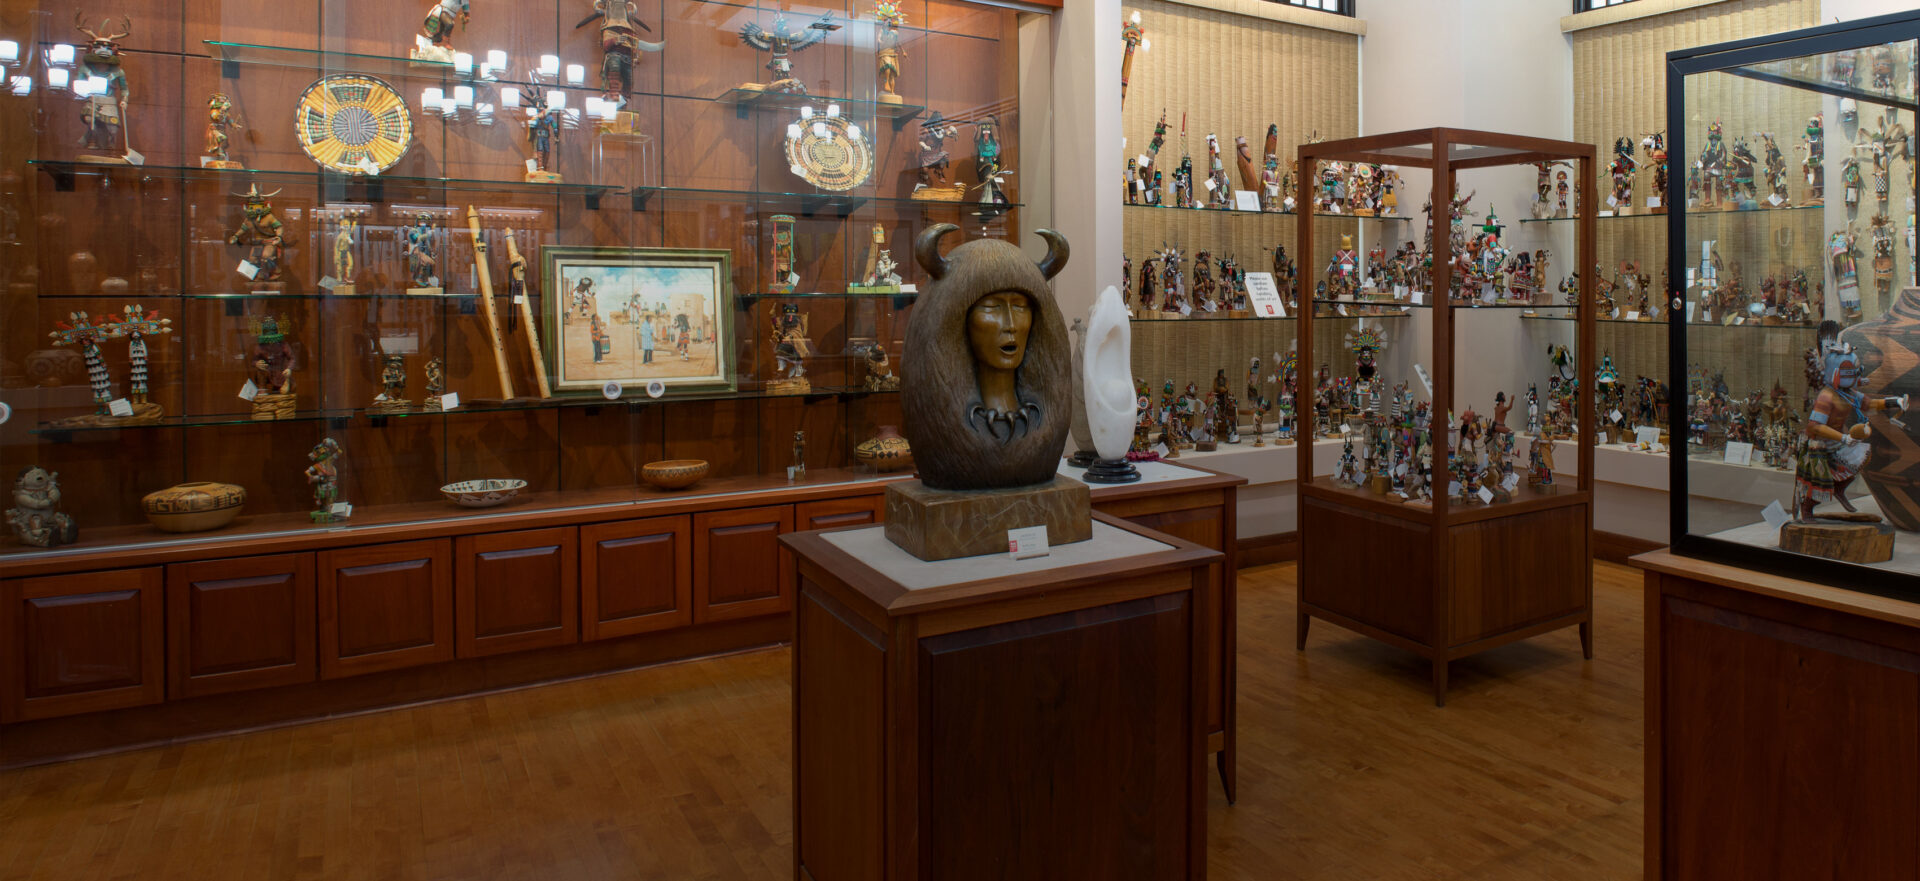 A room with a lot of figurines, sculptures and objects on display.